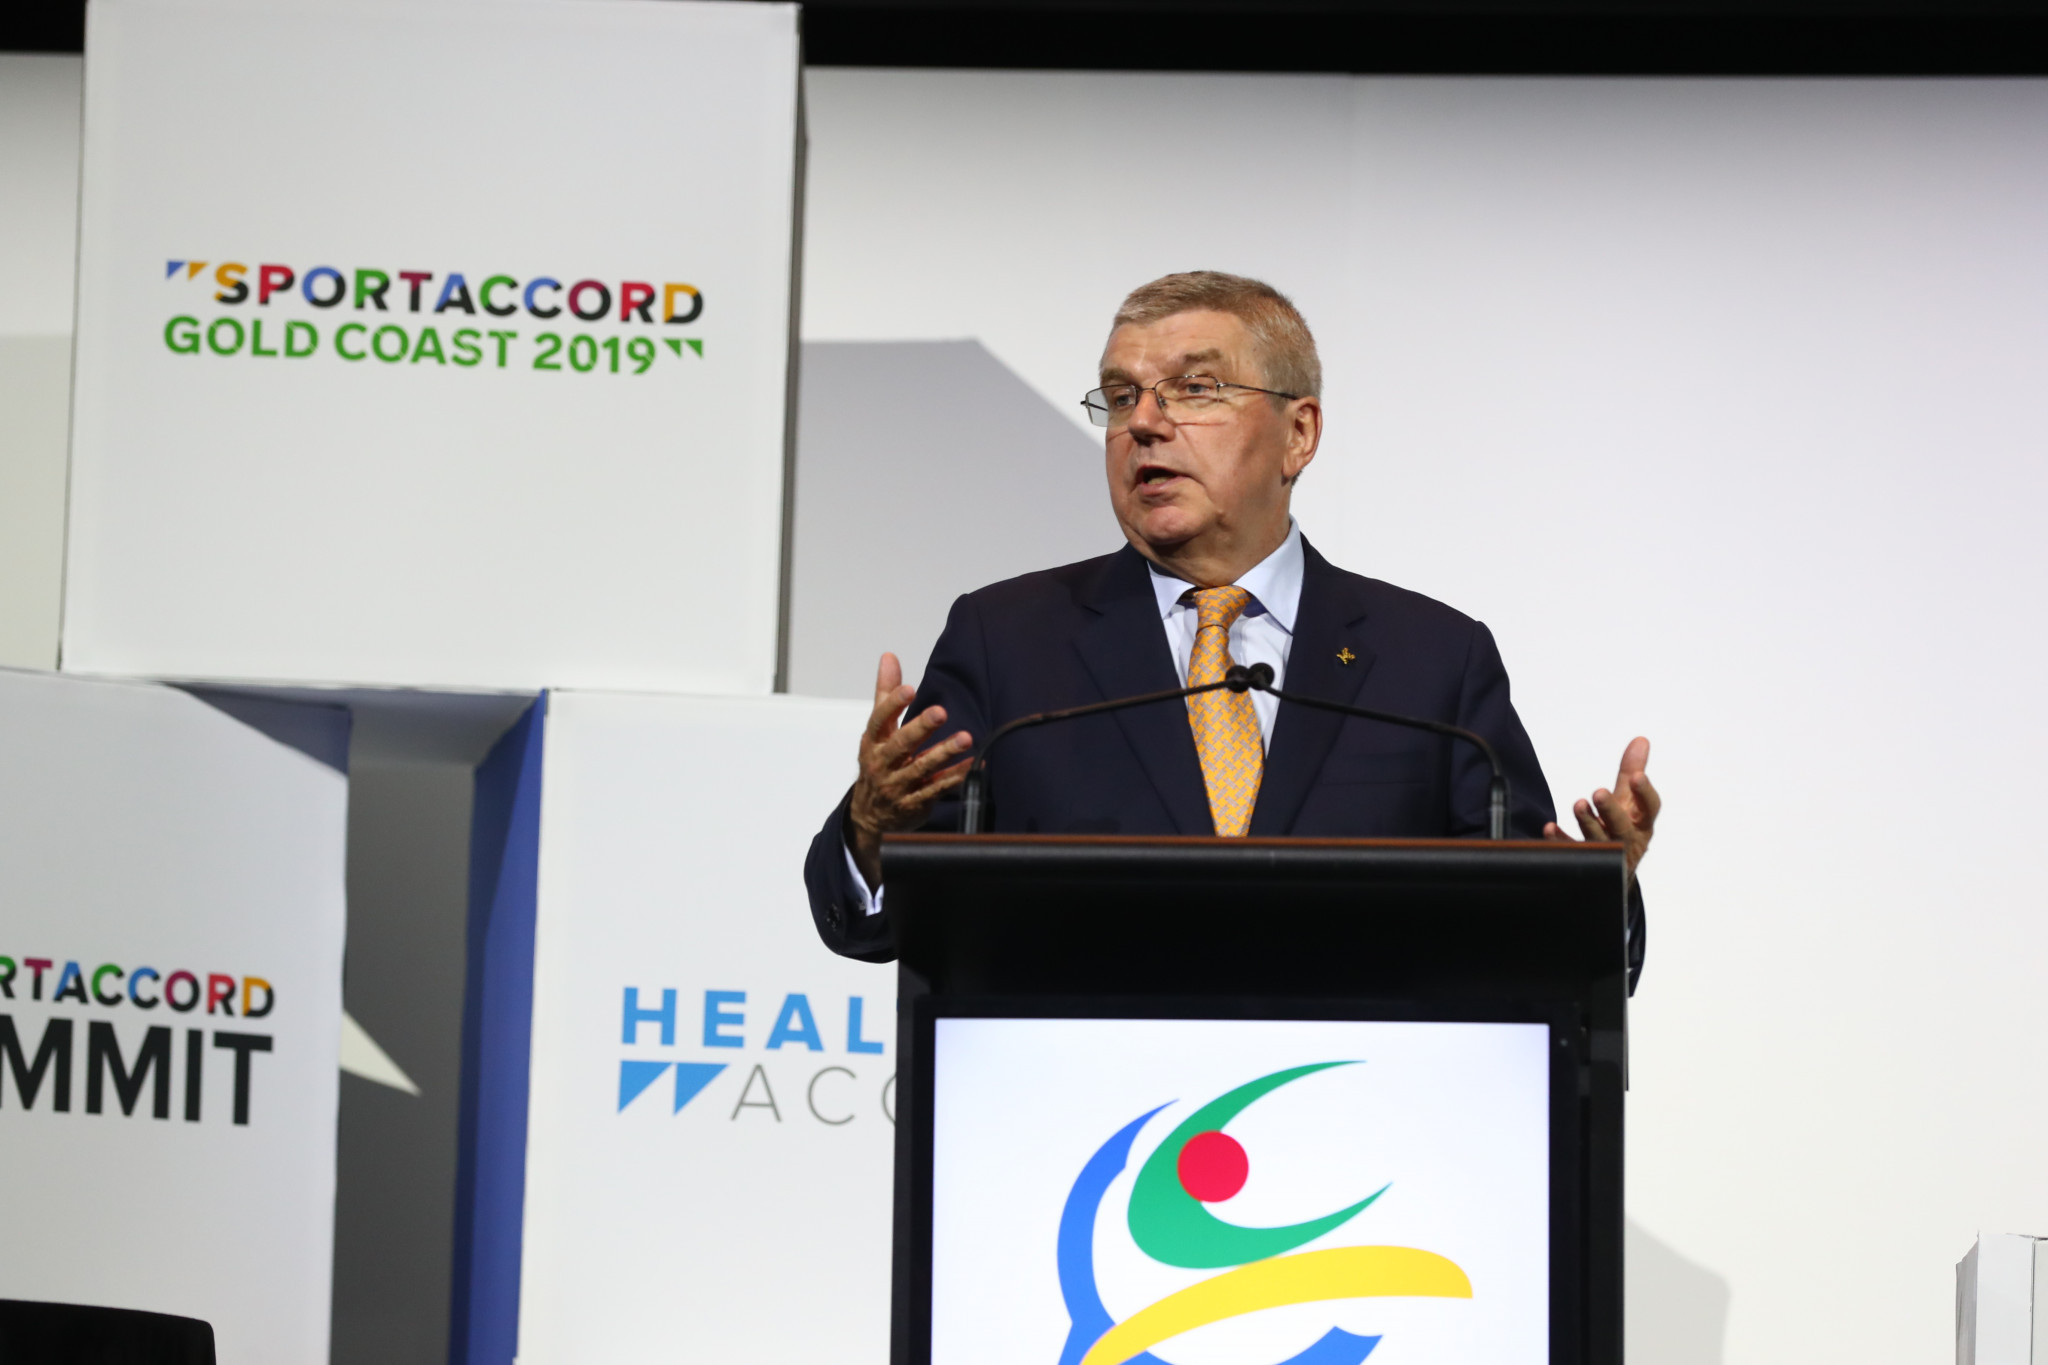 IOC President Thomas Bach addressed the Association of IOC Recognised International Sports Federations General Assembly ©Getty Images